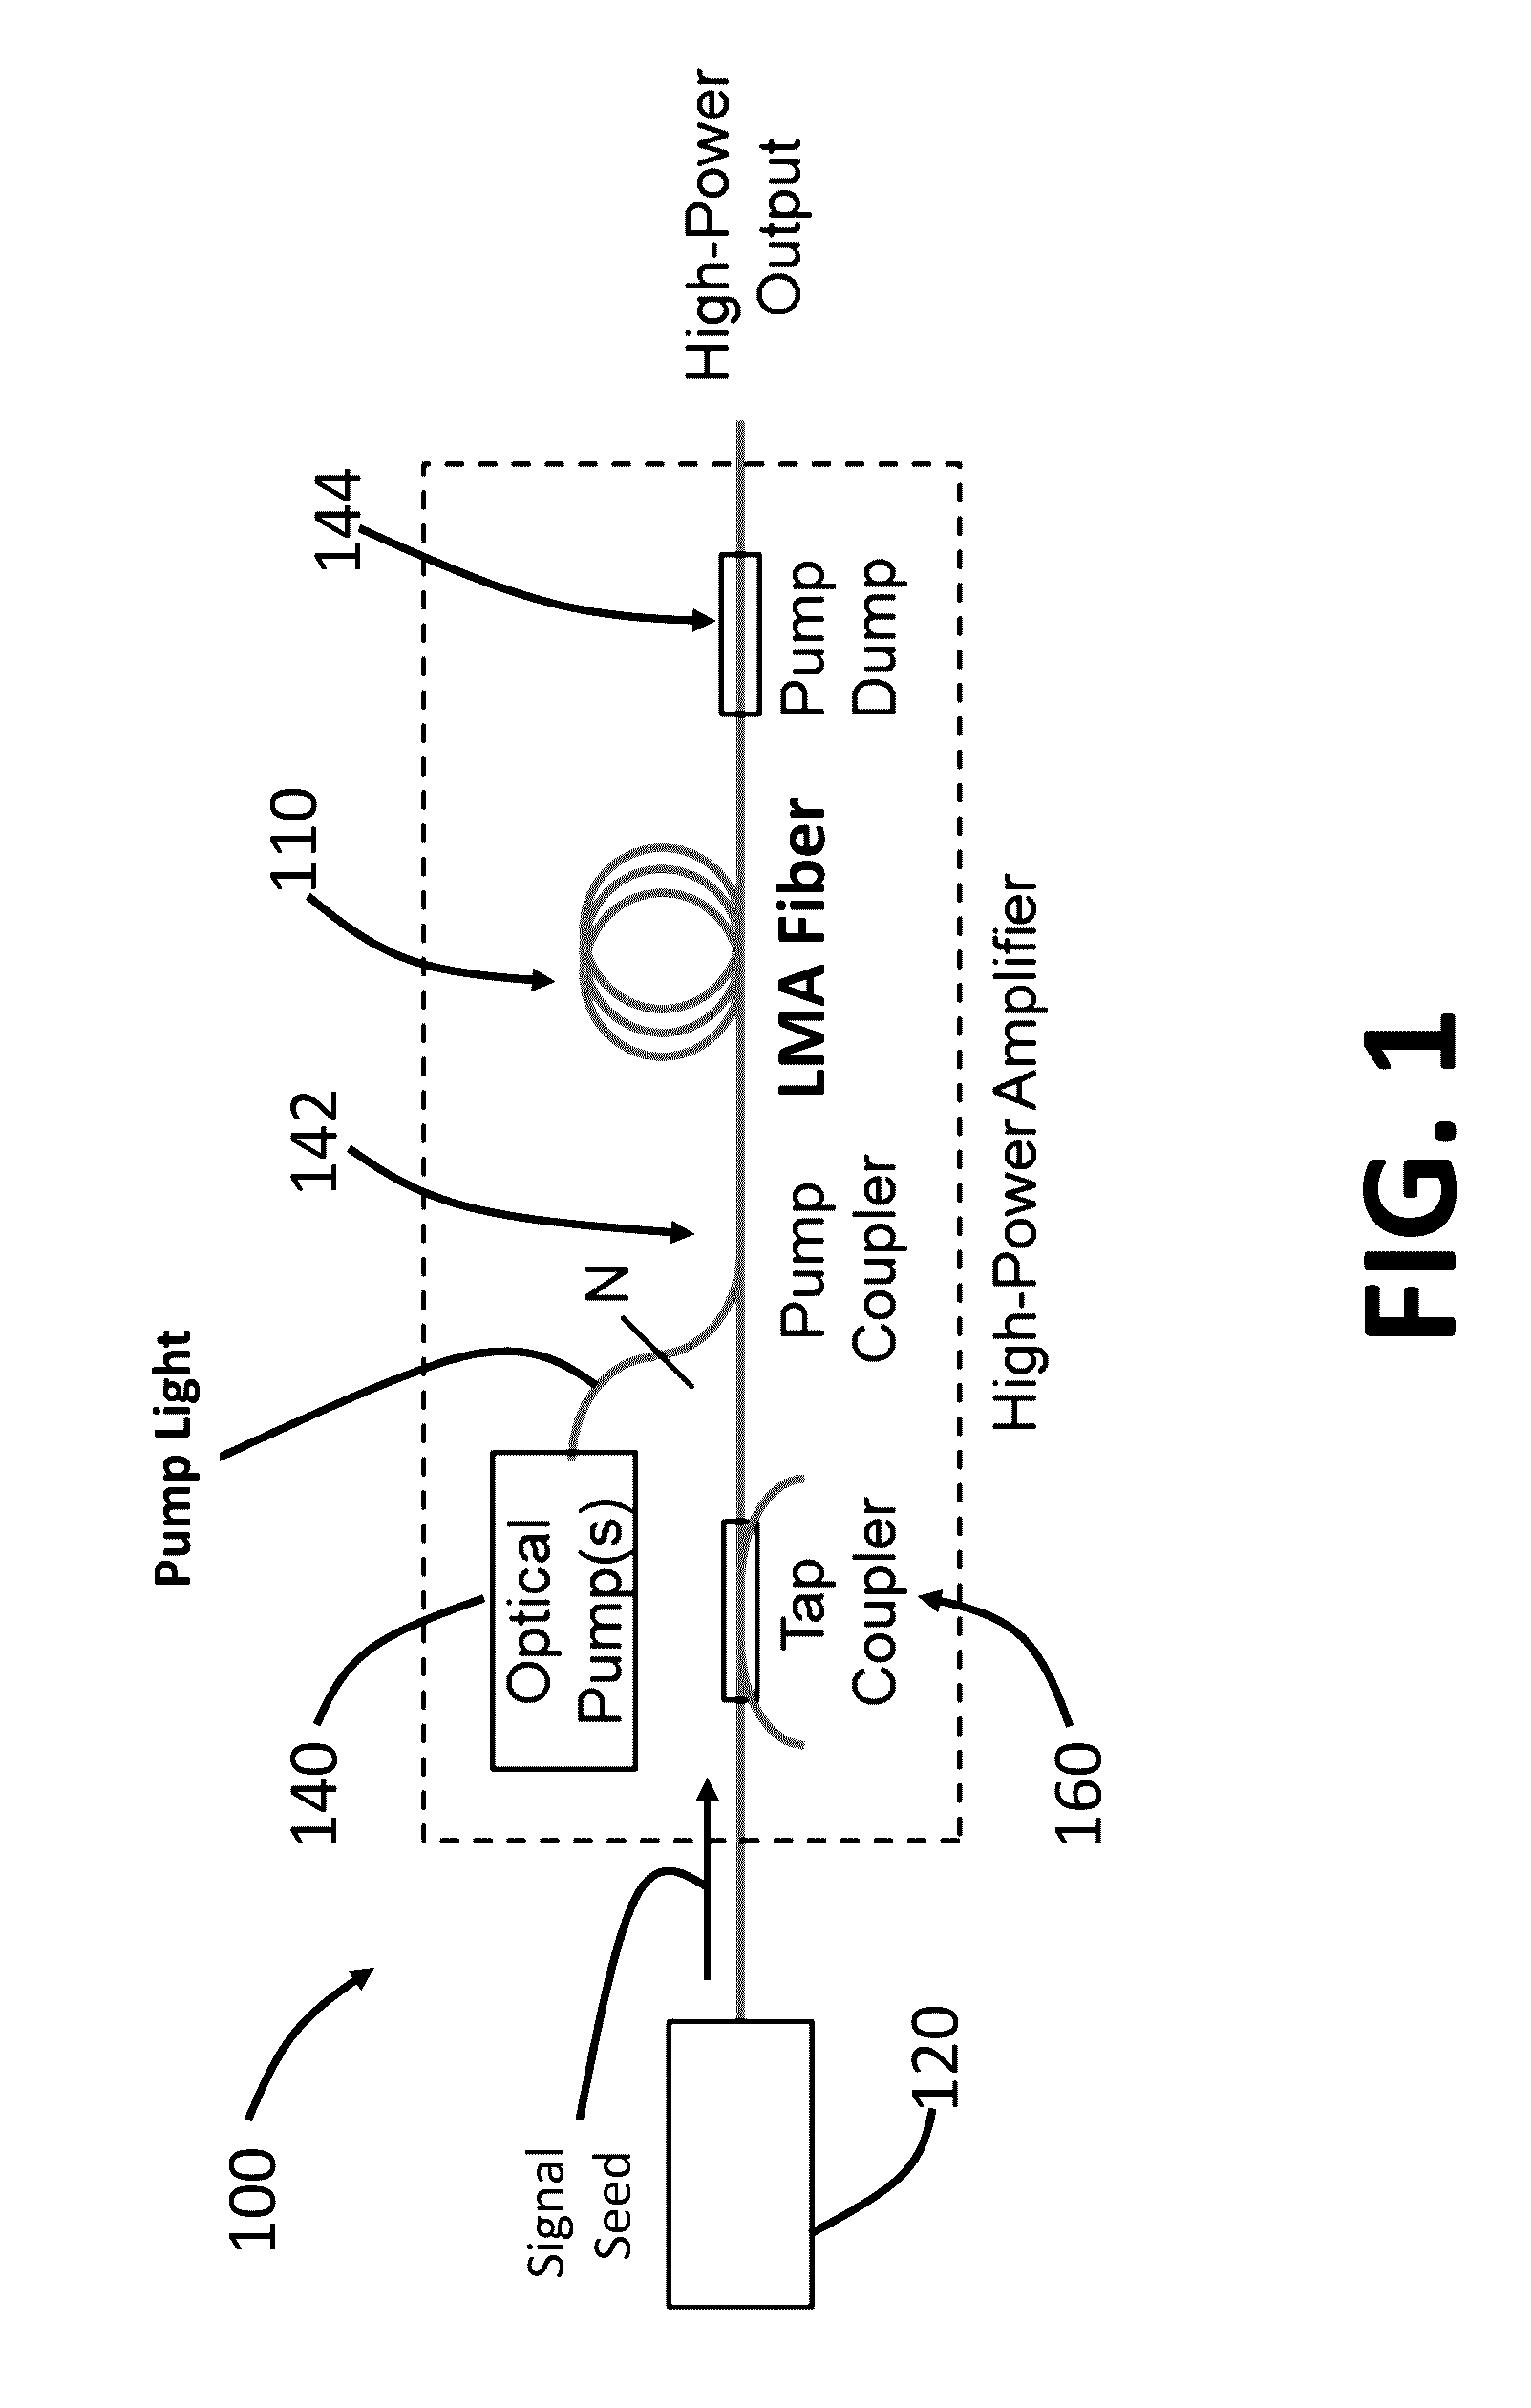 Systems and methods for light amplification